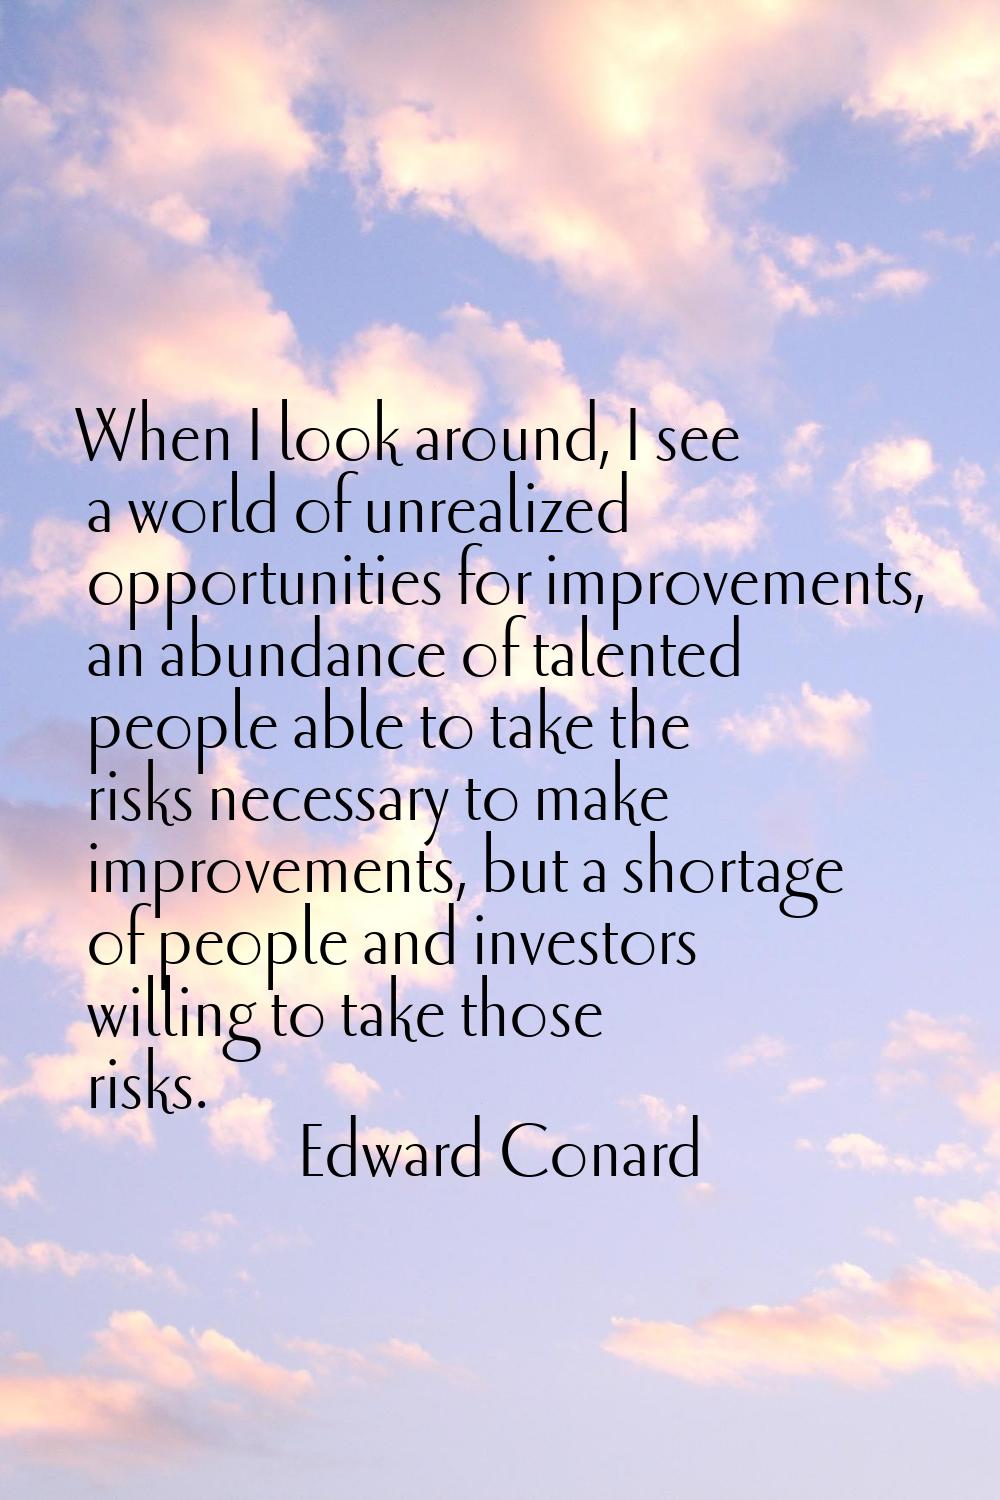 When I look around, I see a world of unrealized opportunities for improvements, an abundance of tal